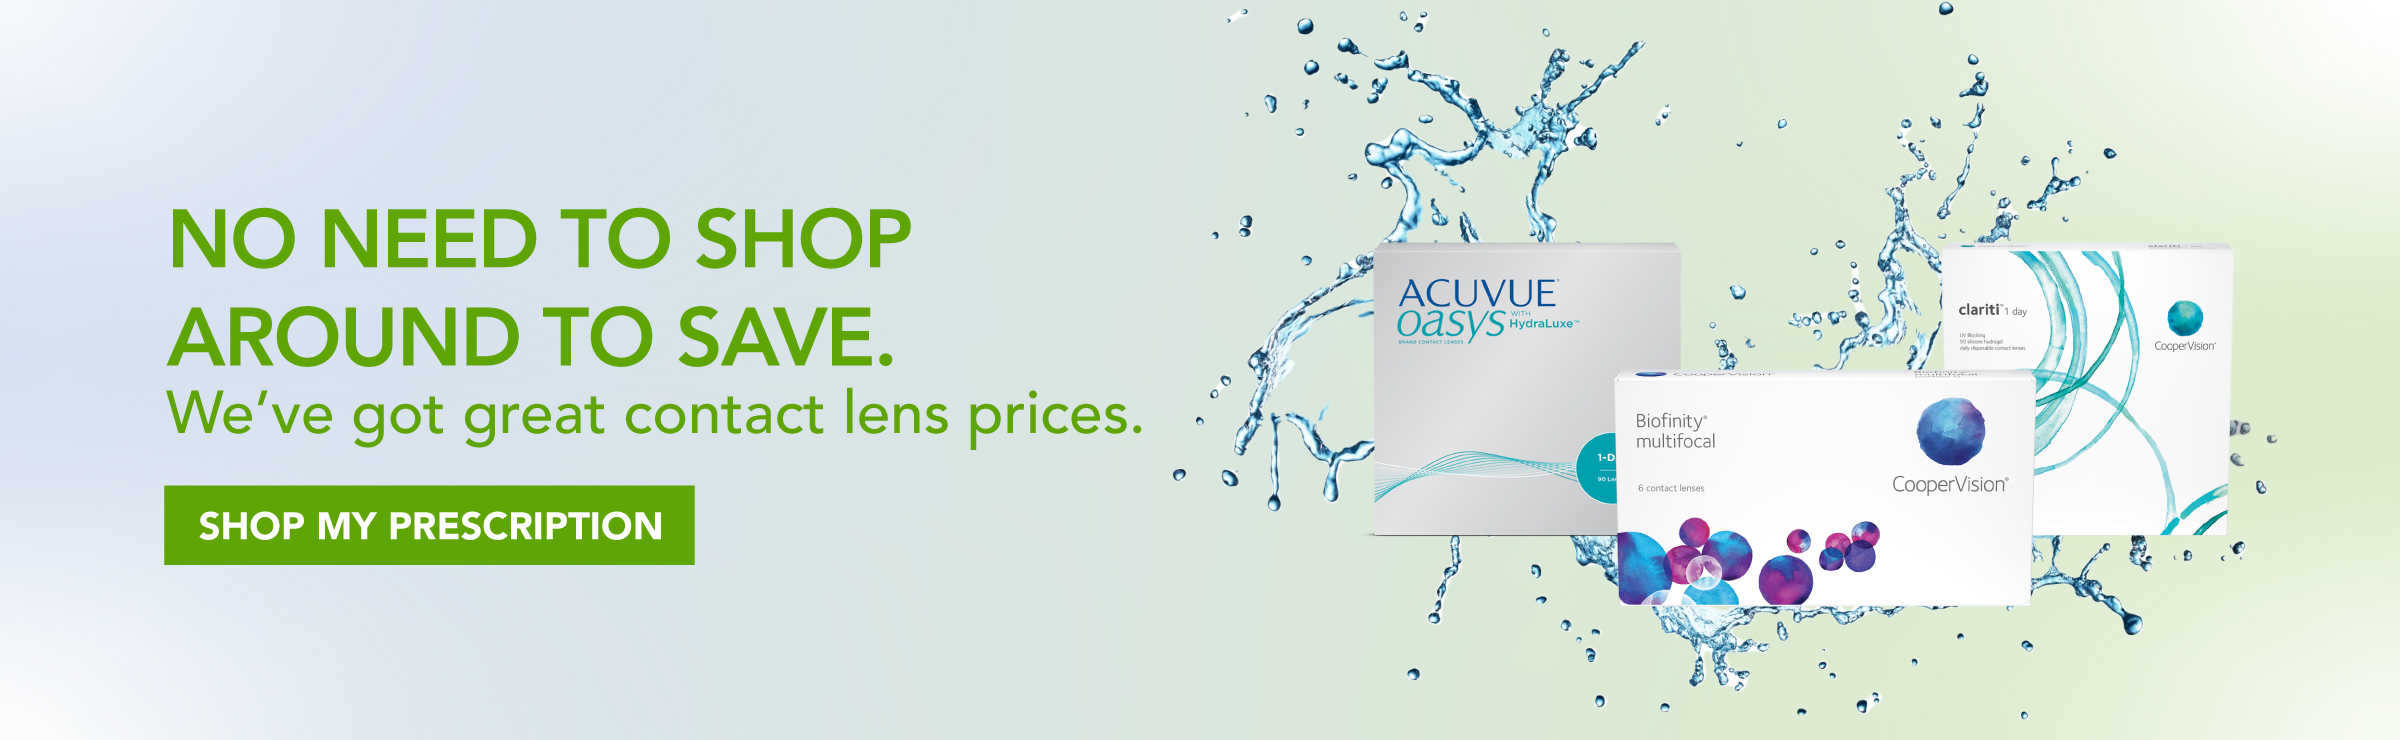 We've got great contact lens prices.